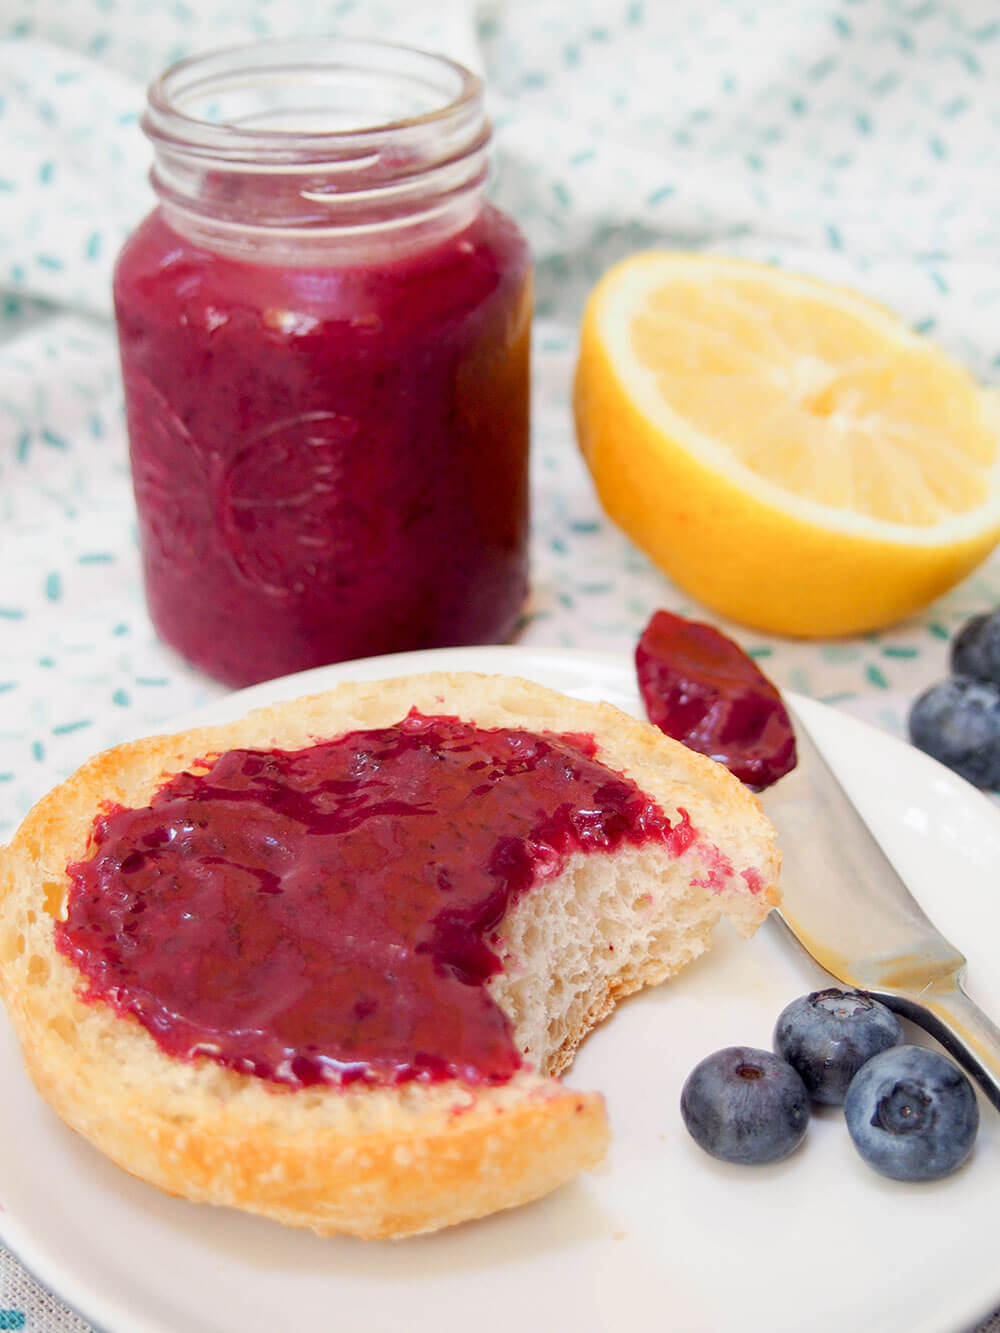 blueberry curd on bread with jar in background